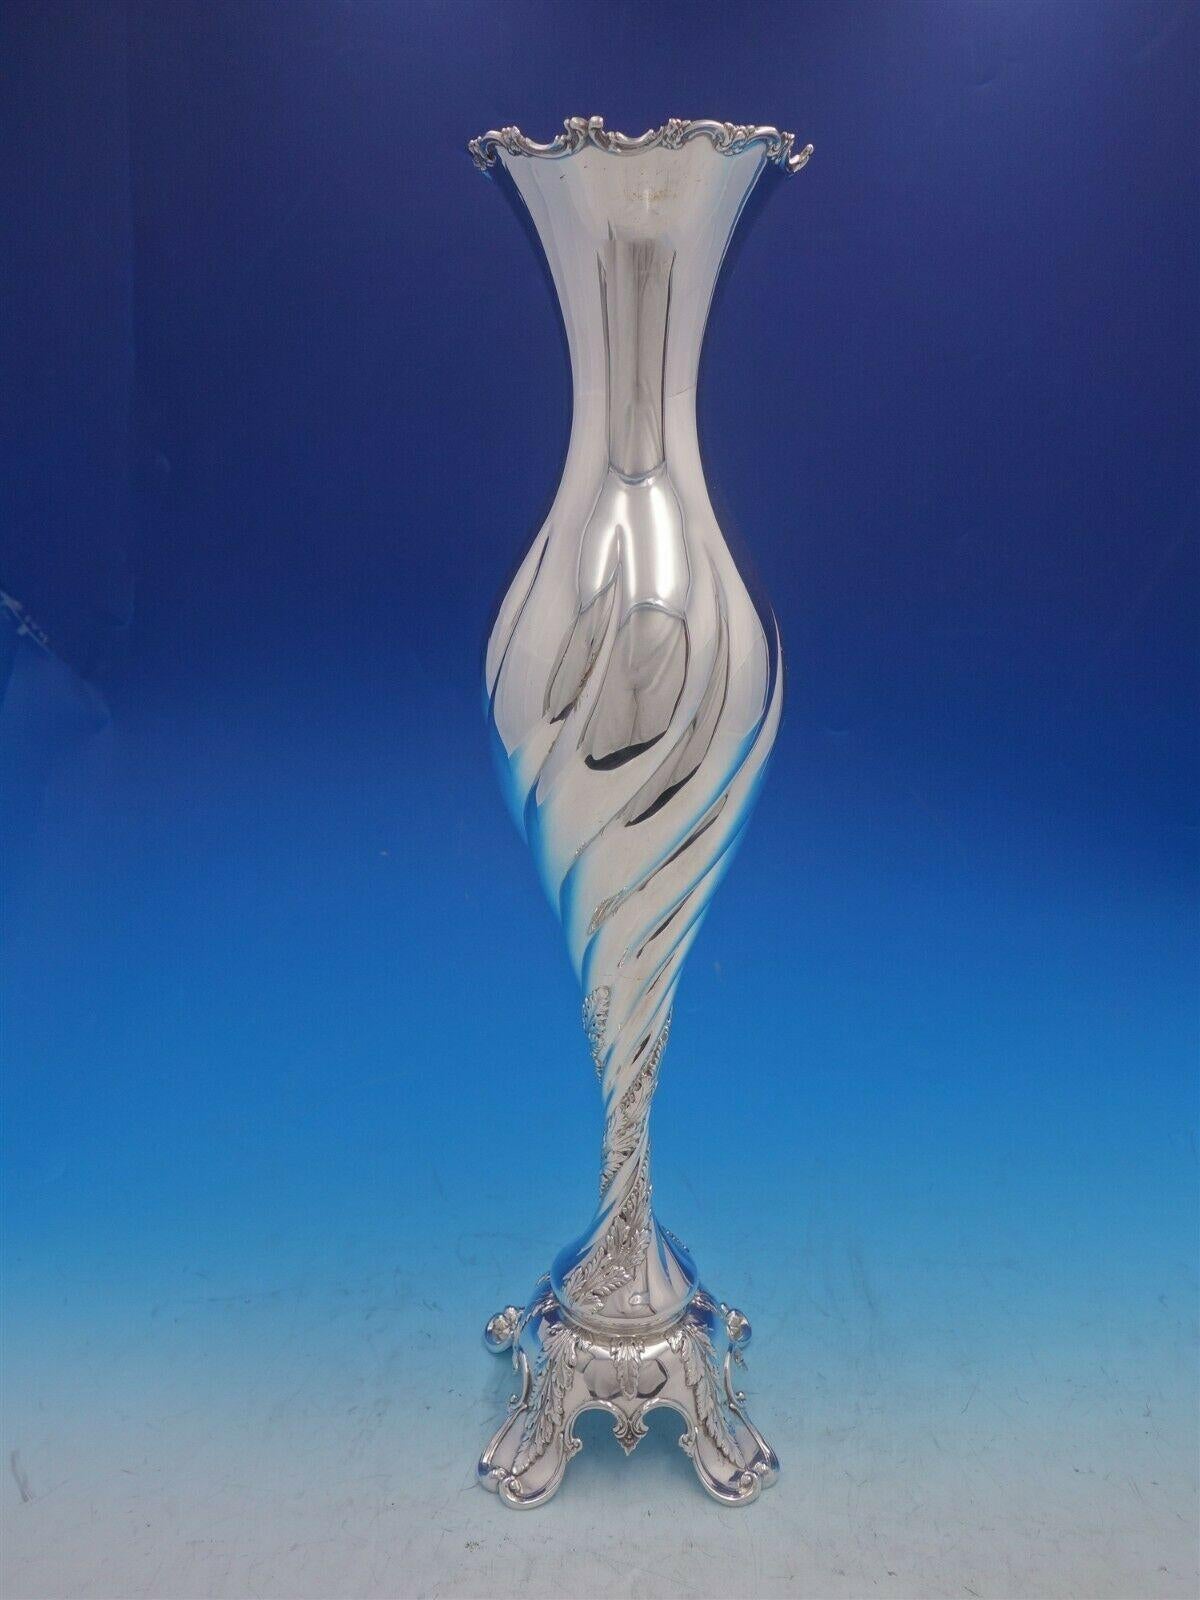 Tiffany & Co.

Incredible monumental Tiffany & Co. sterling silver vase marked #12497 1451. It measures an impressive 21